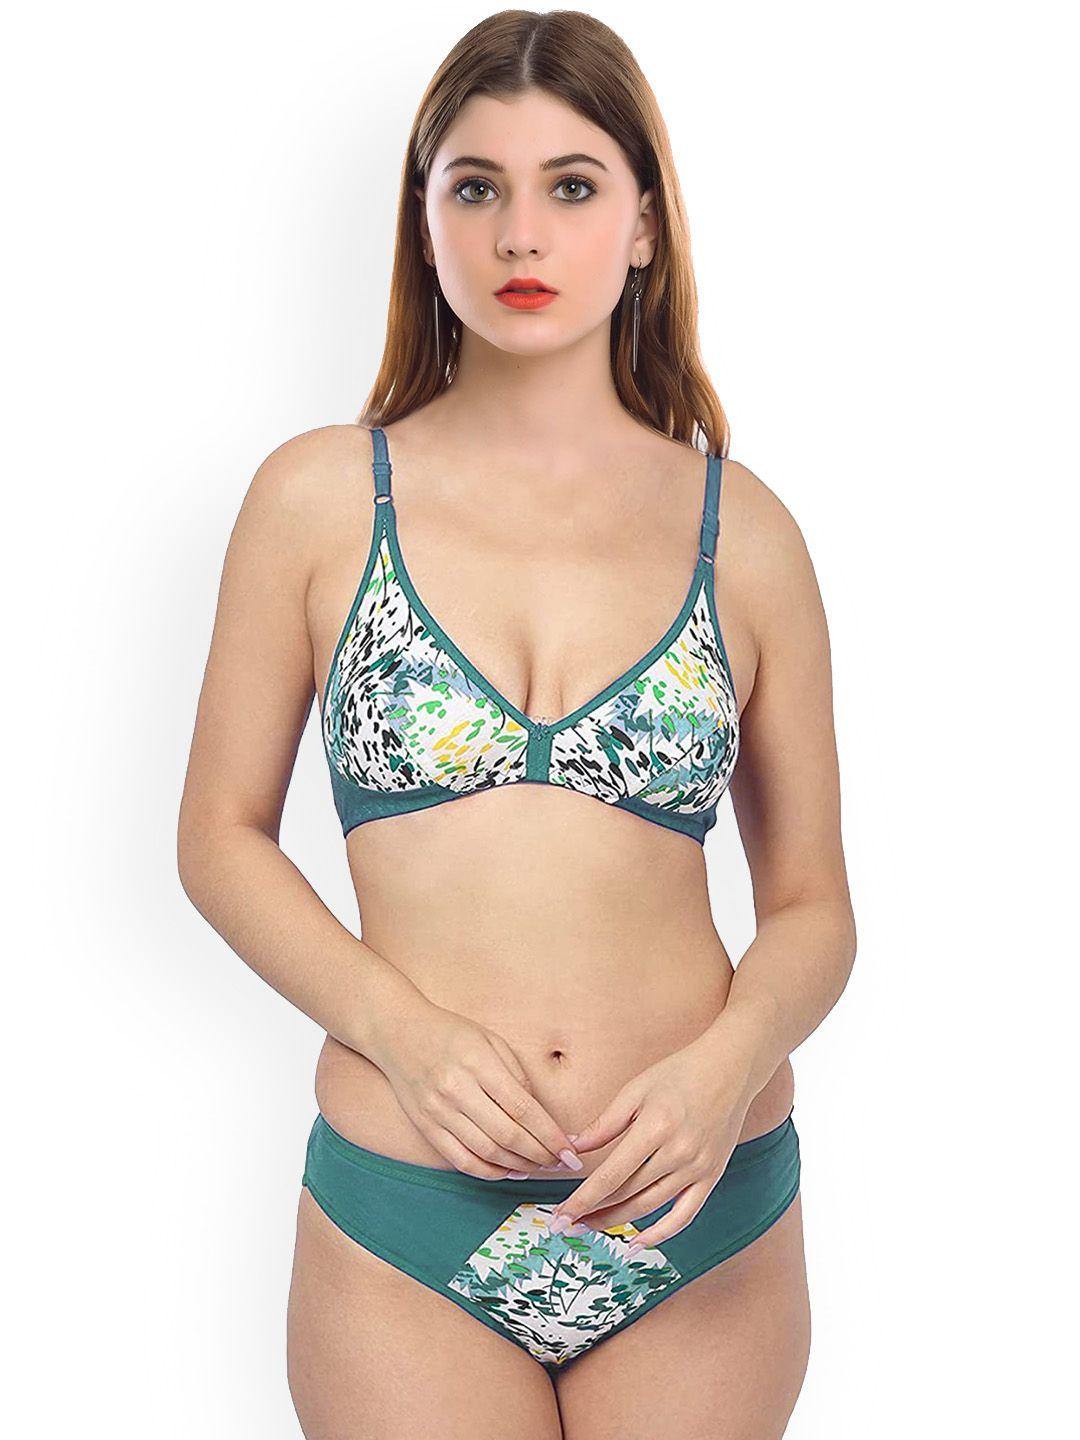 arousy printed non-padded cotton lingerie set